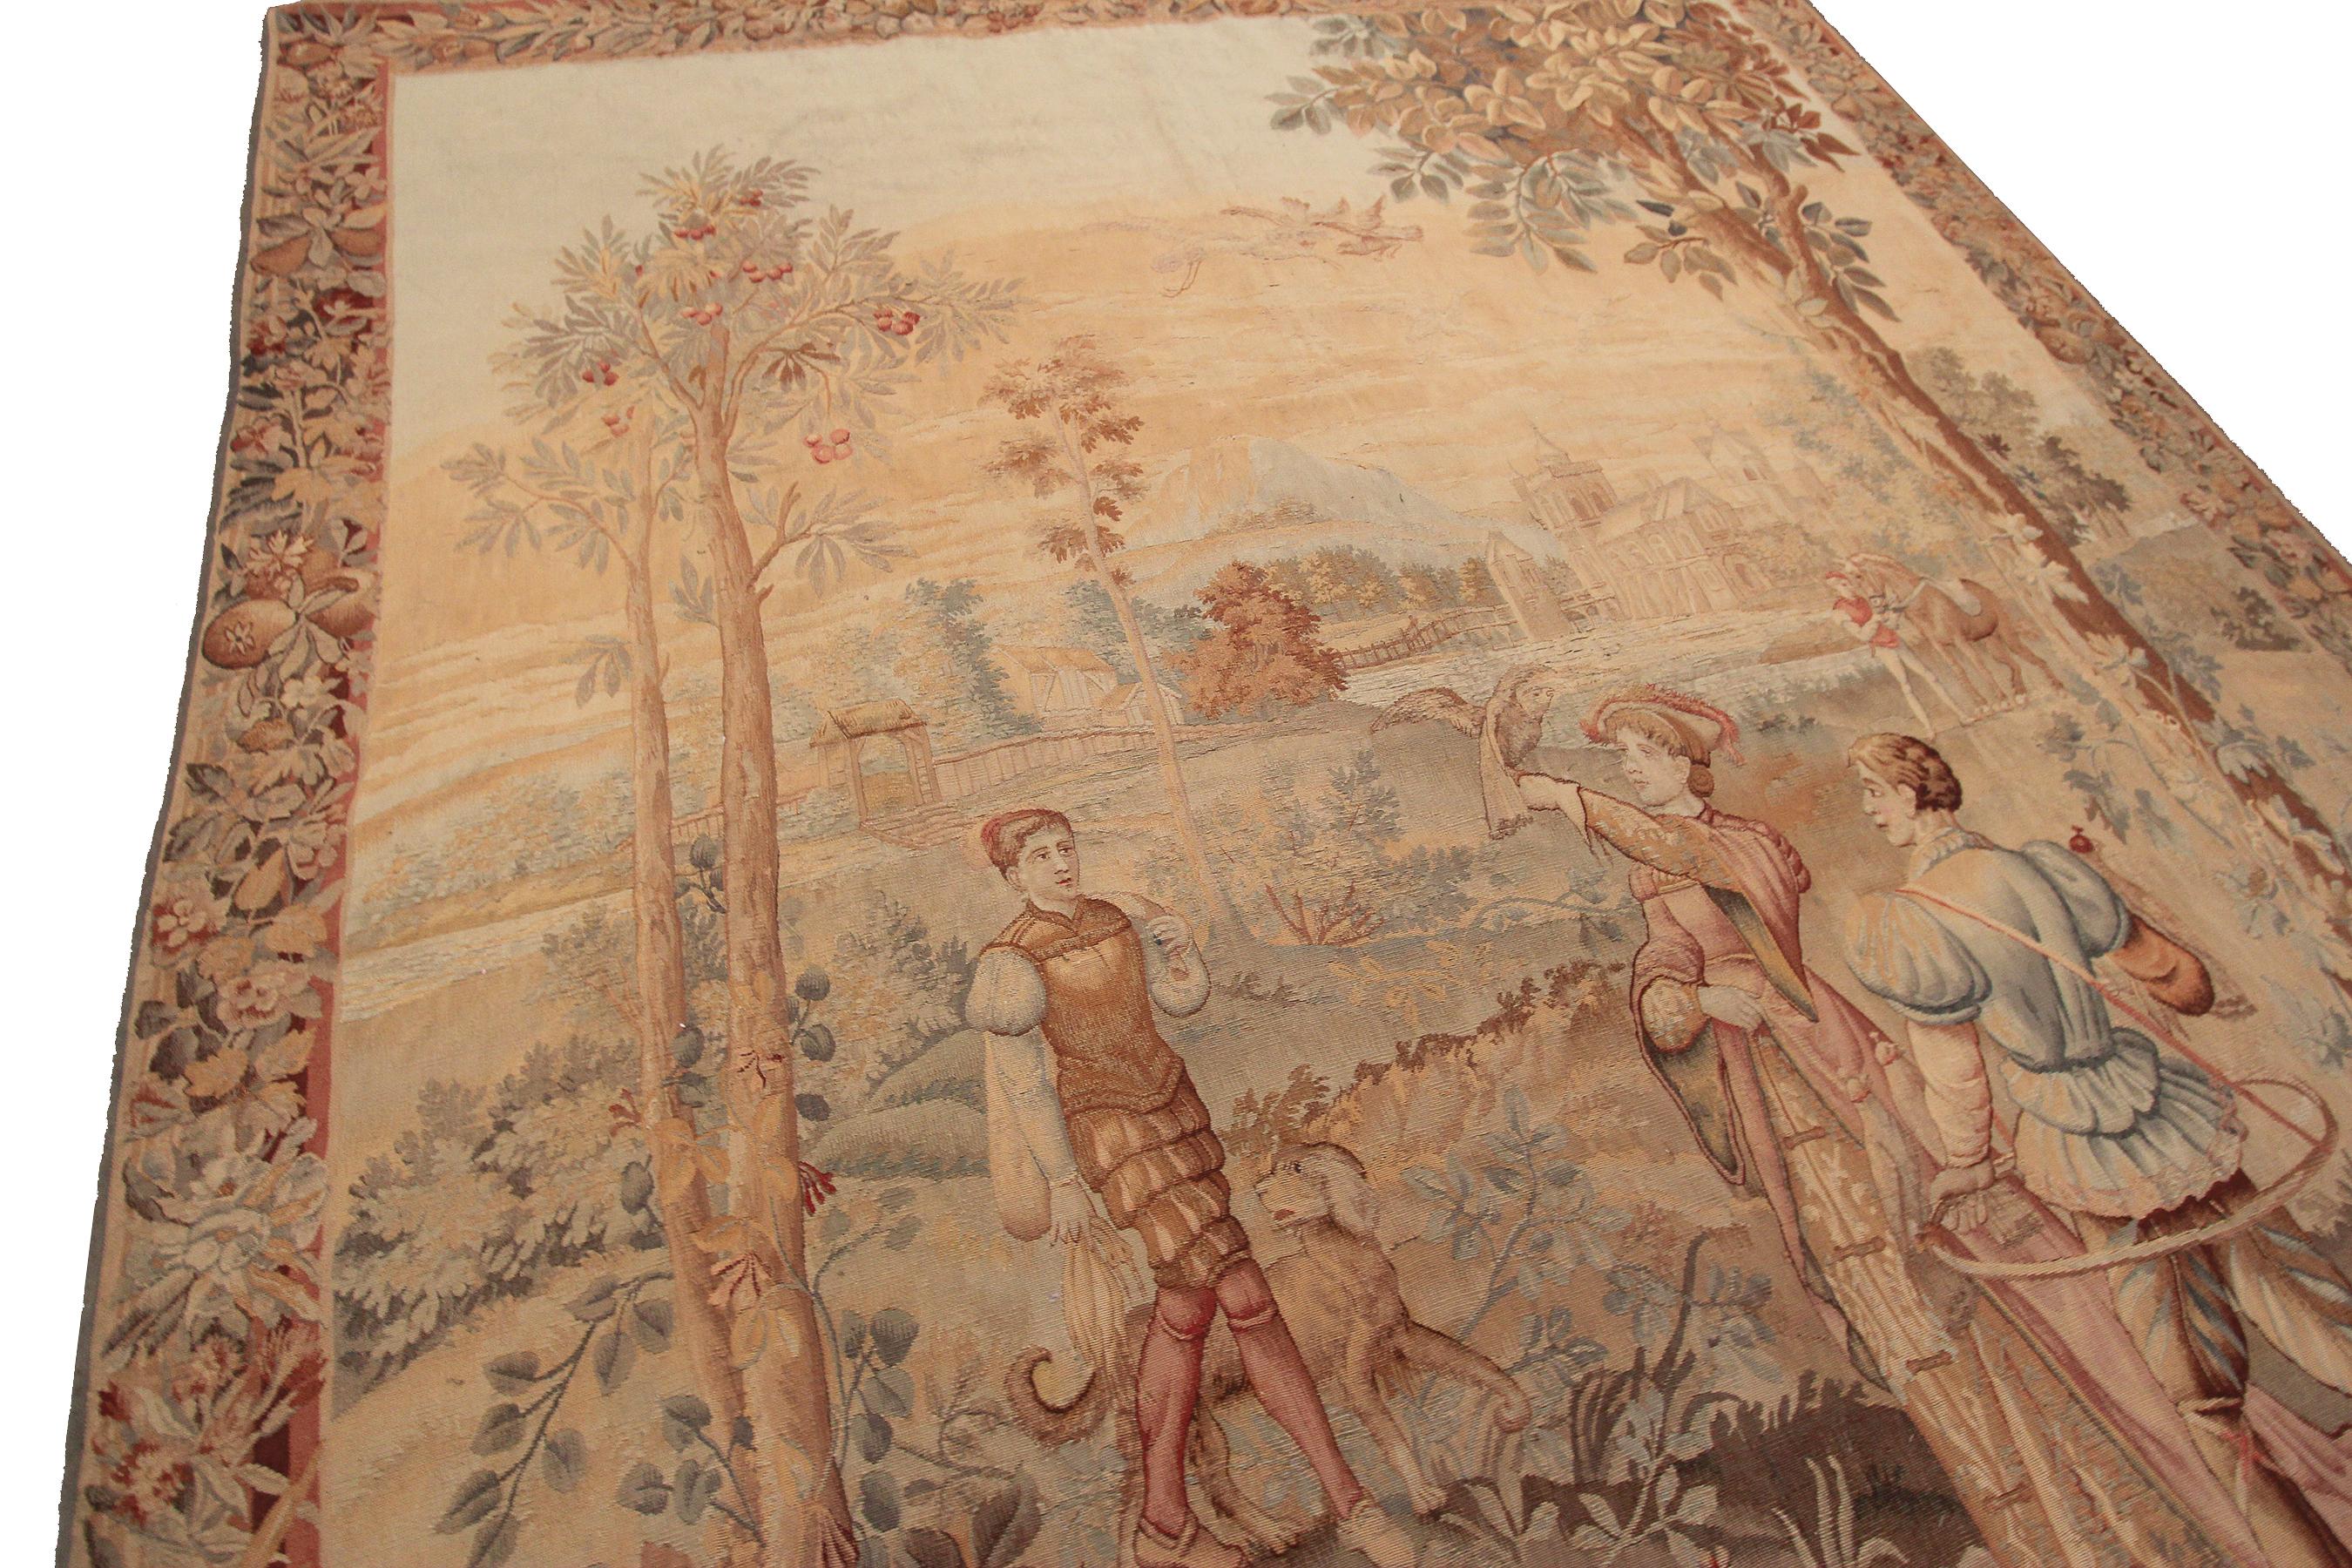 Hand-Woven Large Antique Flemish Tapestry Antique Tapestry Verdure Wool & Silk 1850 For Sale